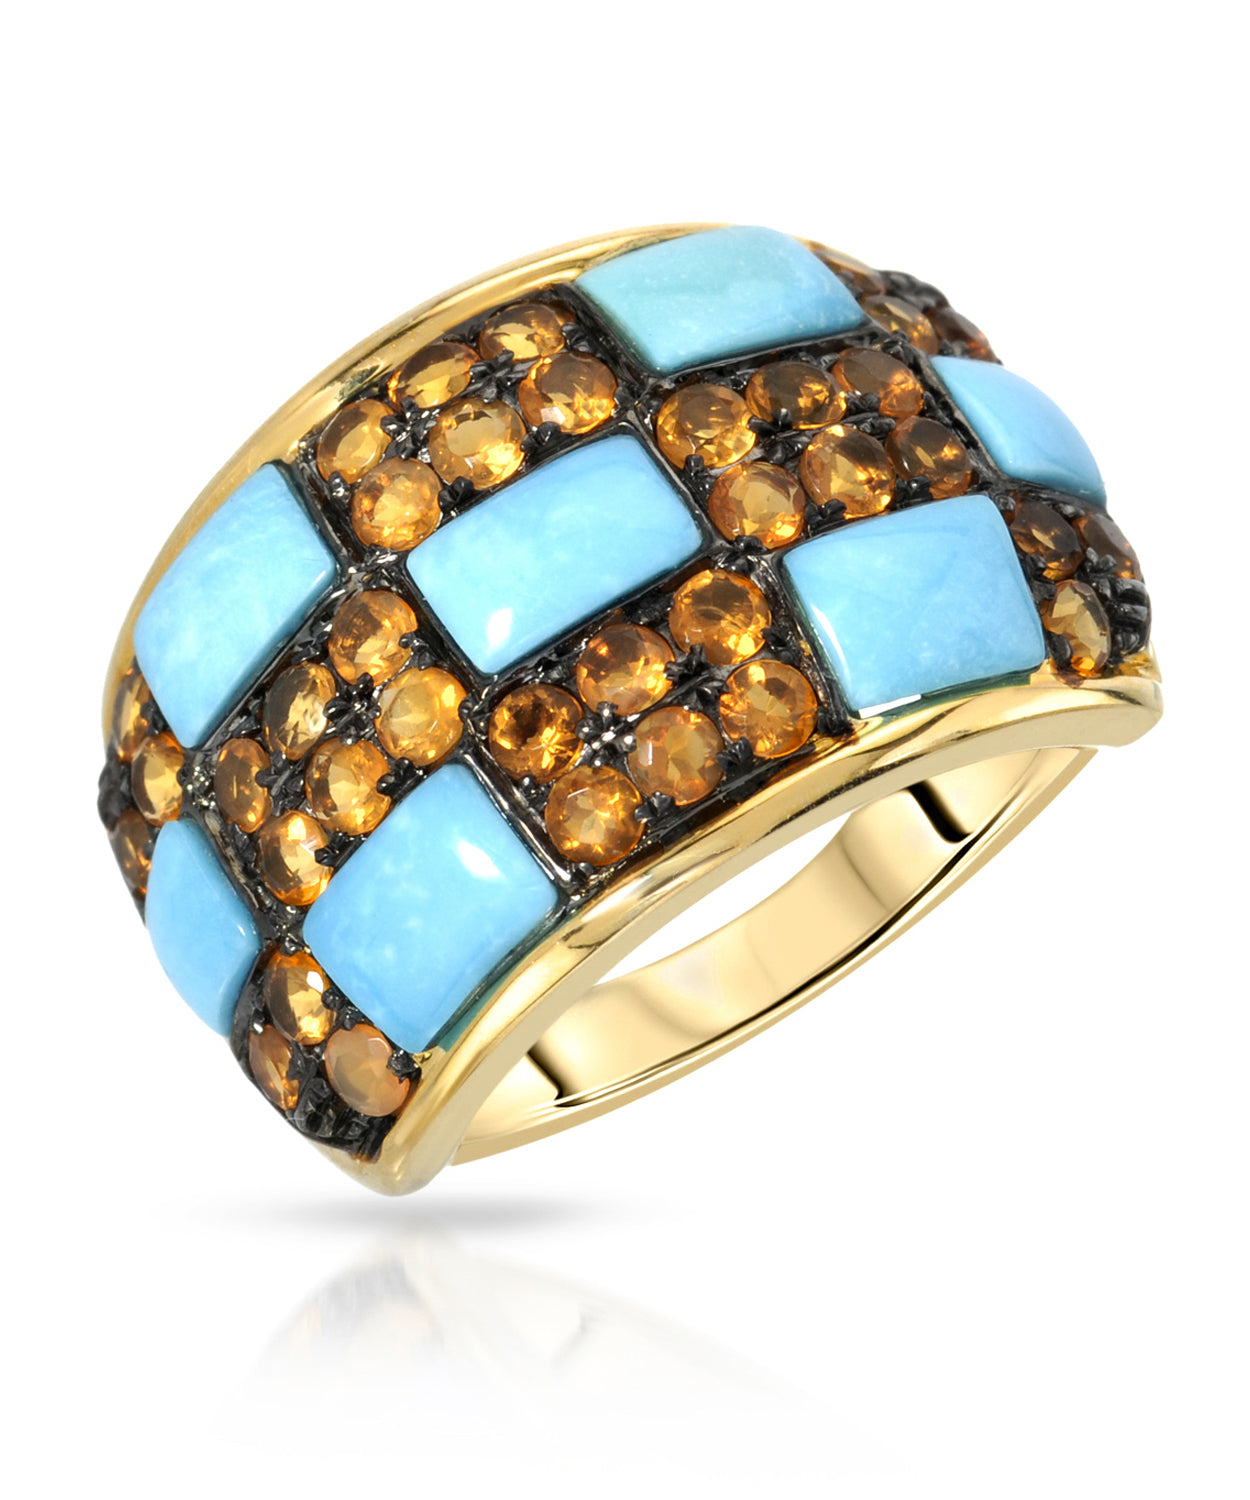 3.13 ctw Natural Turquoise and Fire Opal 14k Gold Ring View 1